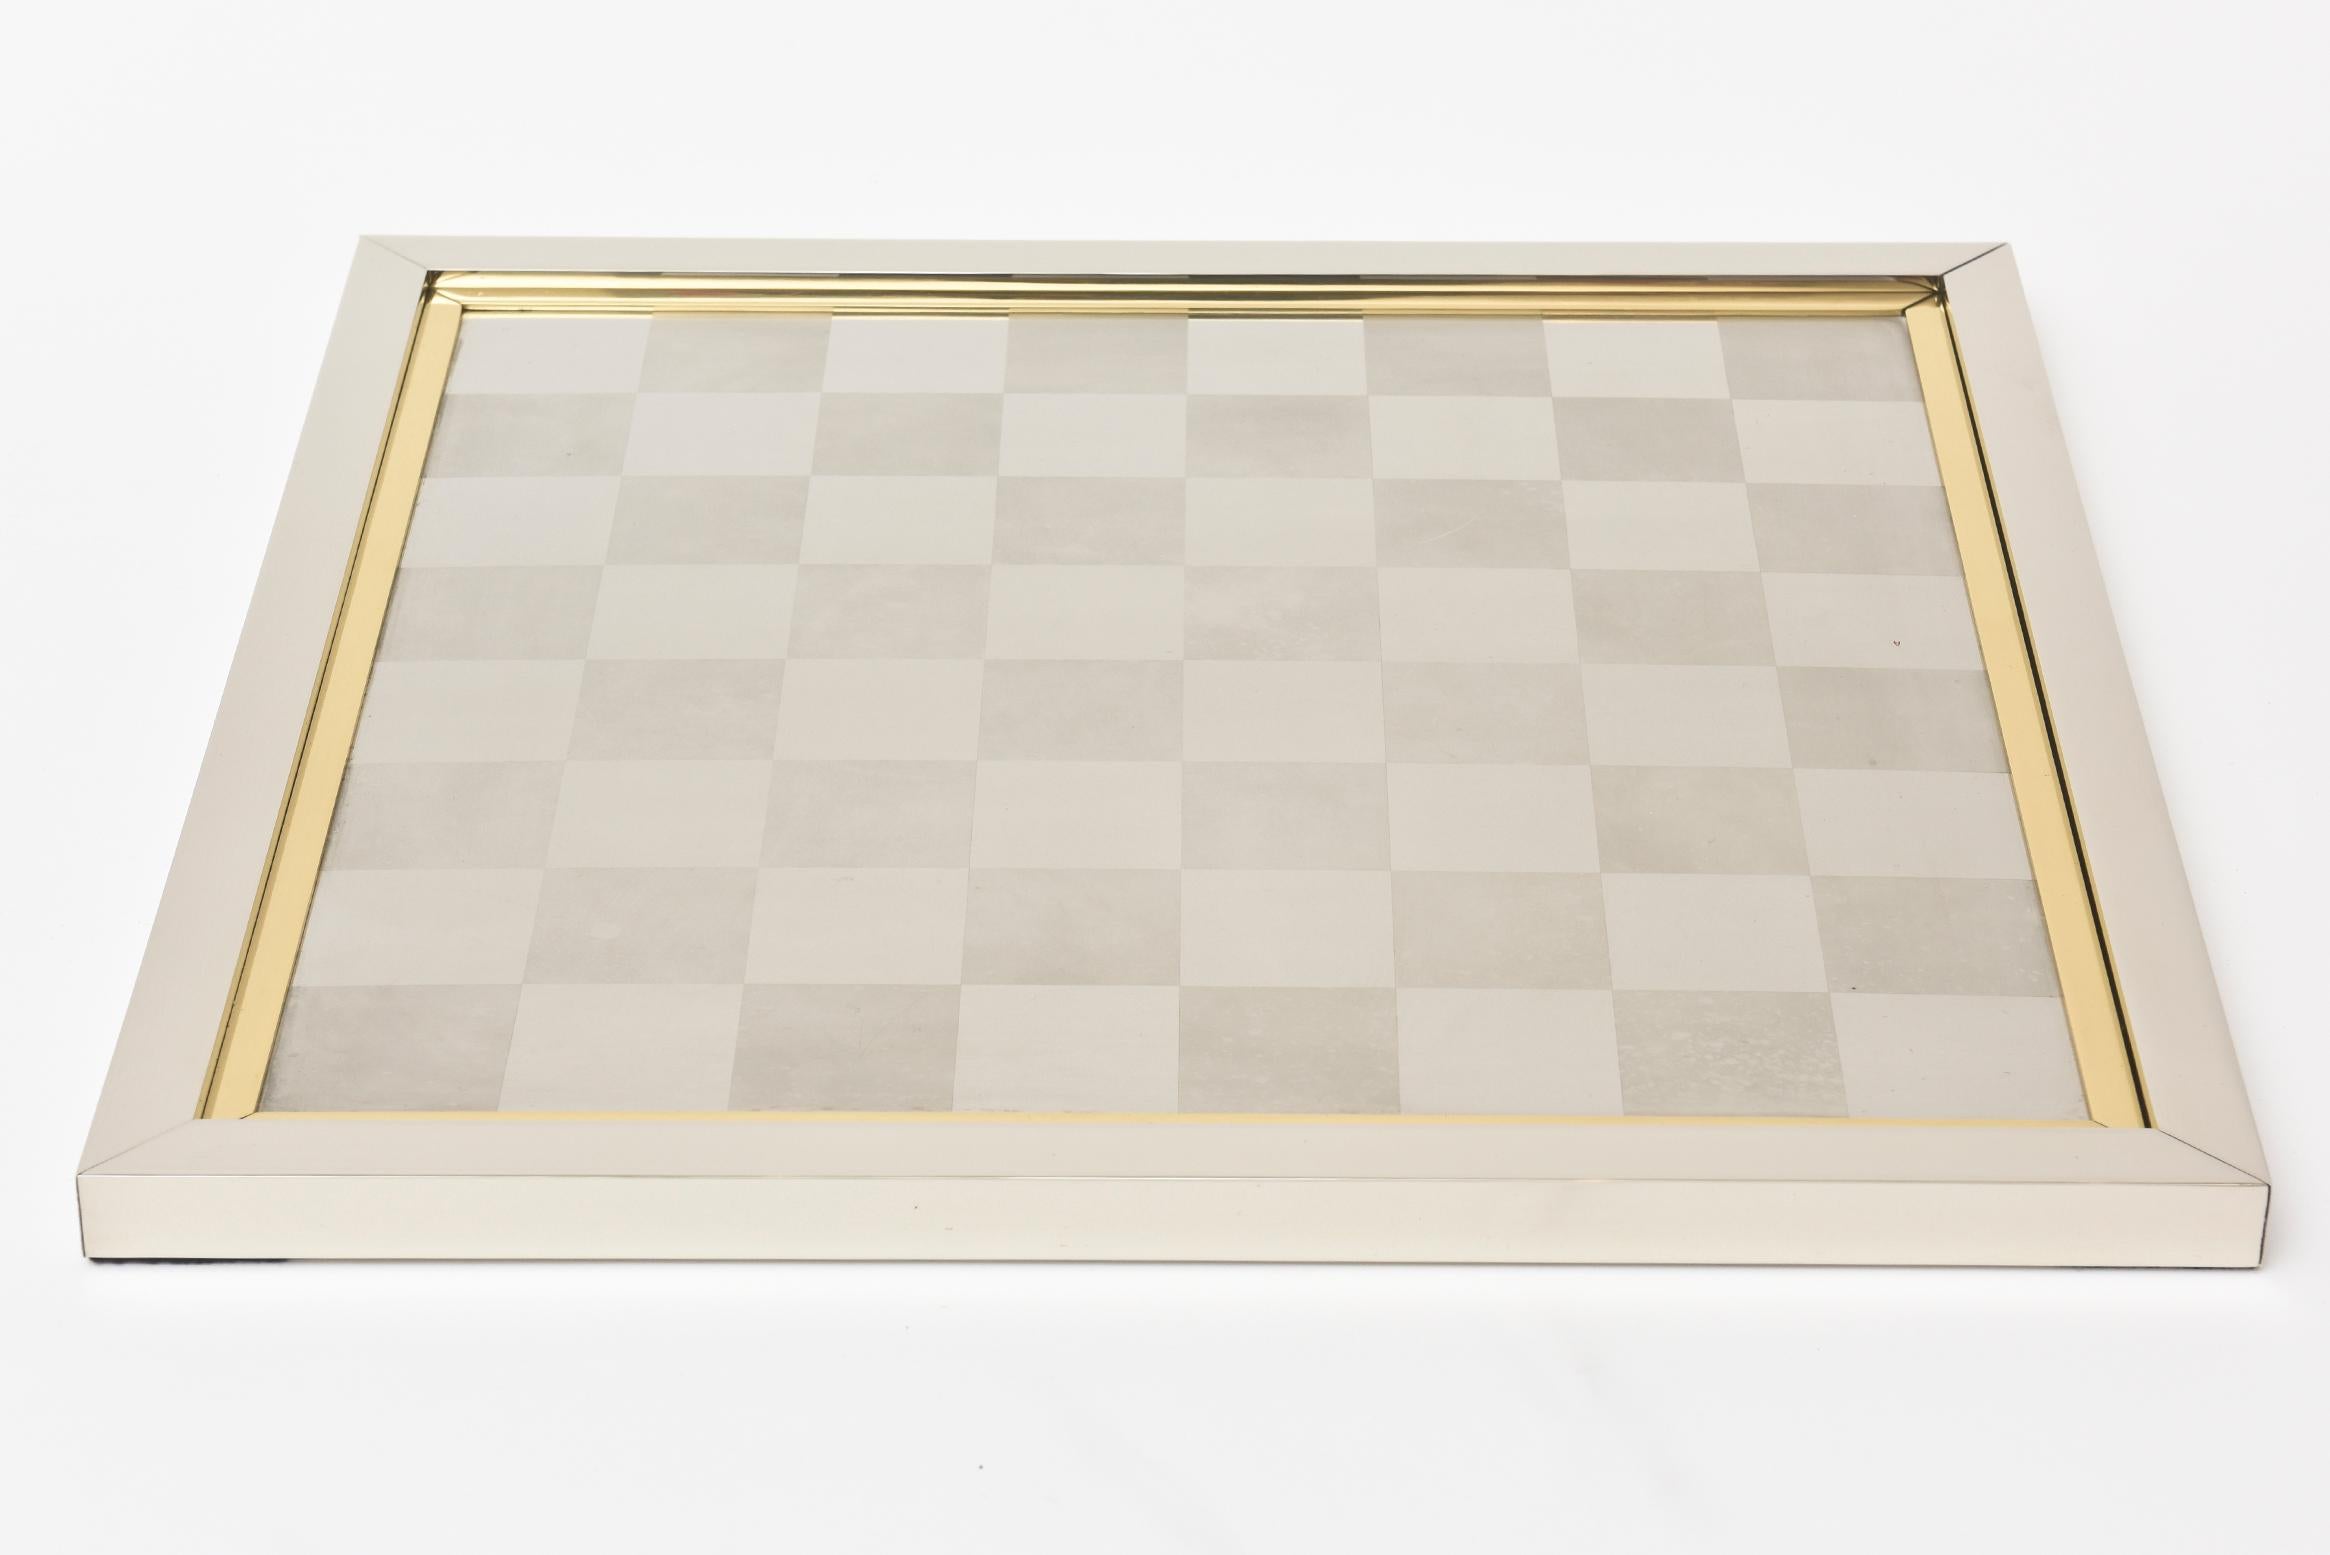 Romeo Rega Signed Brass and Chrome-Plated Checkers Game, Italian Vintage In Good Condition For Sale In North Miami, FL